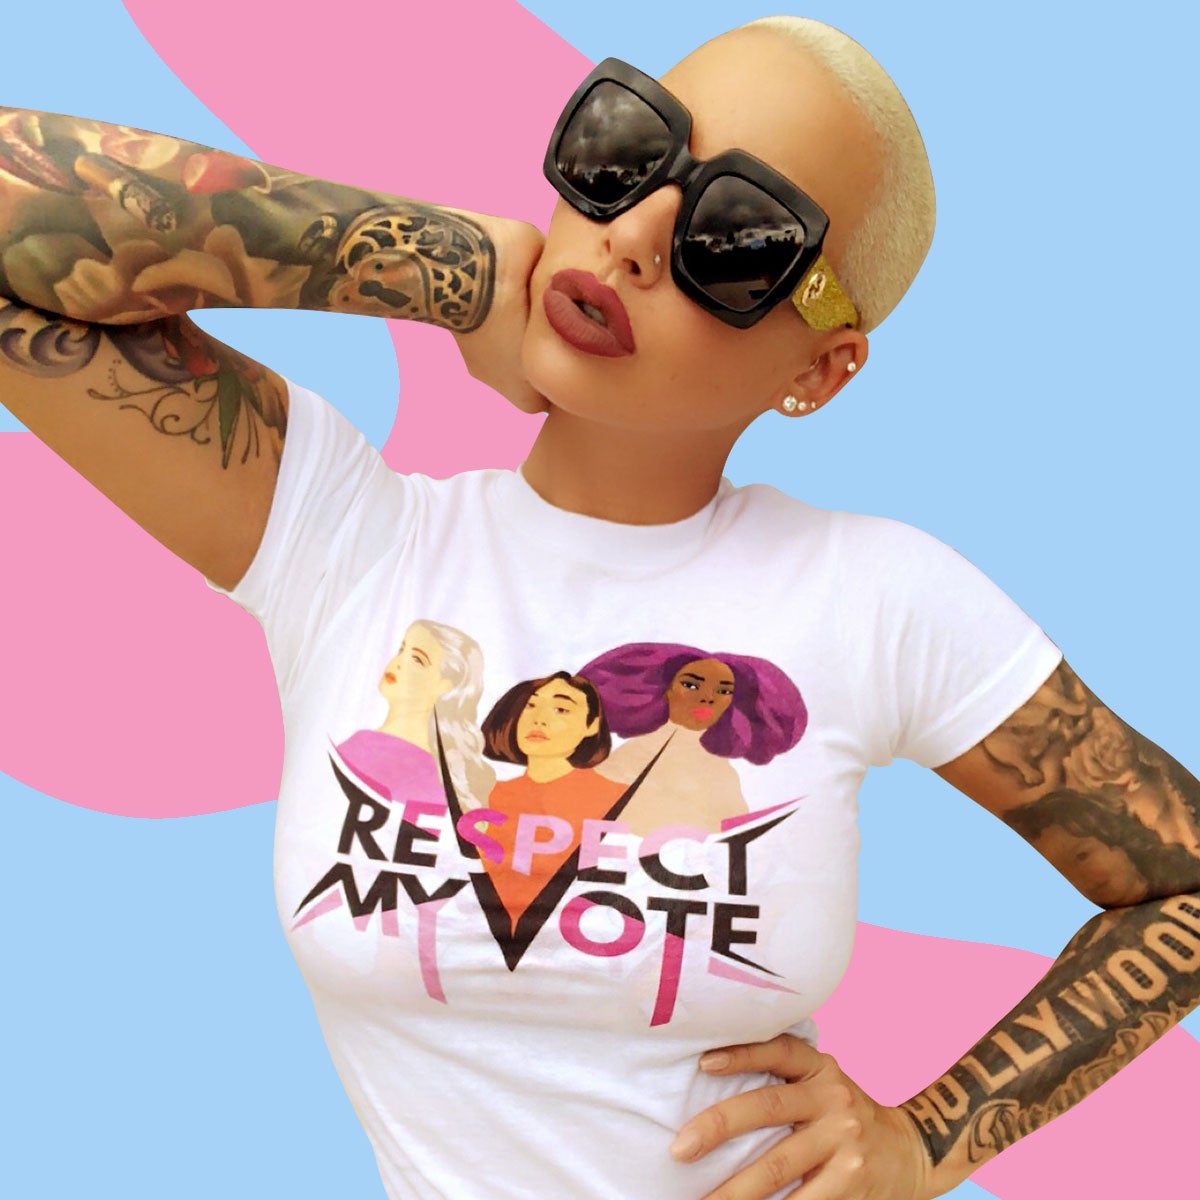 Amber Rose Wants You To Respect Her Vote And SlutWalk